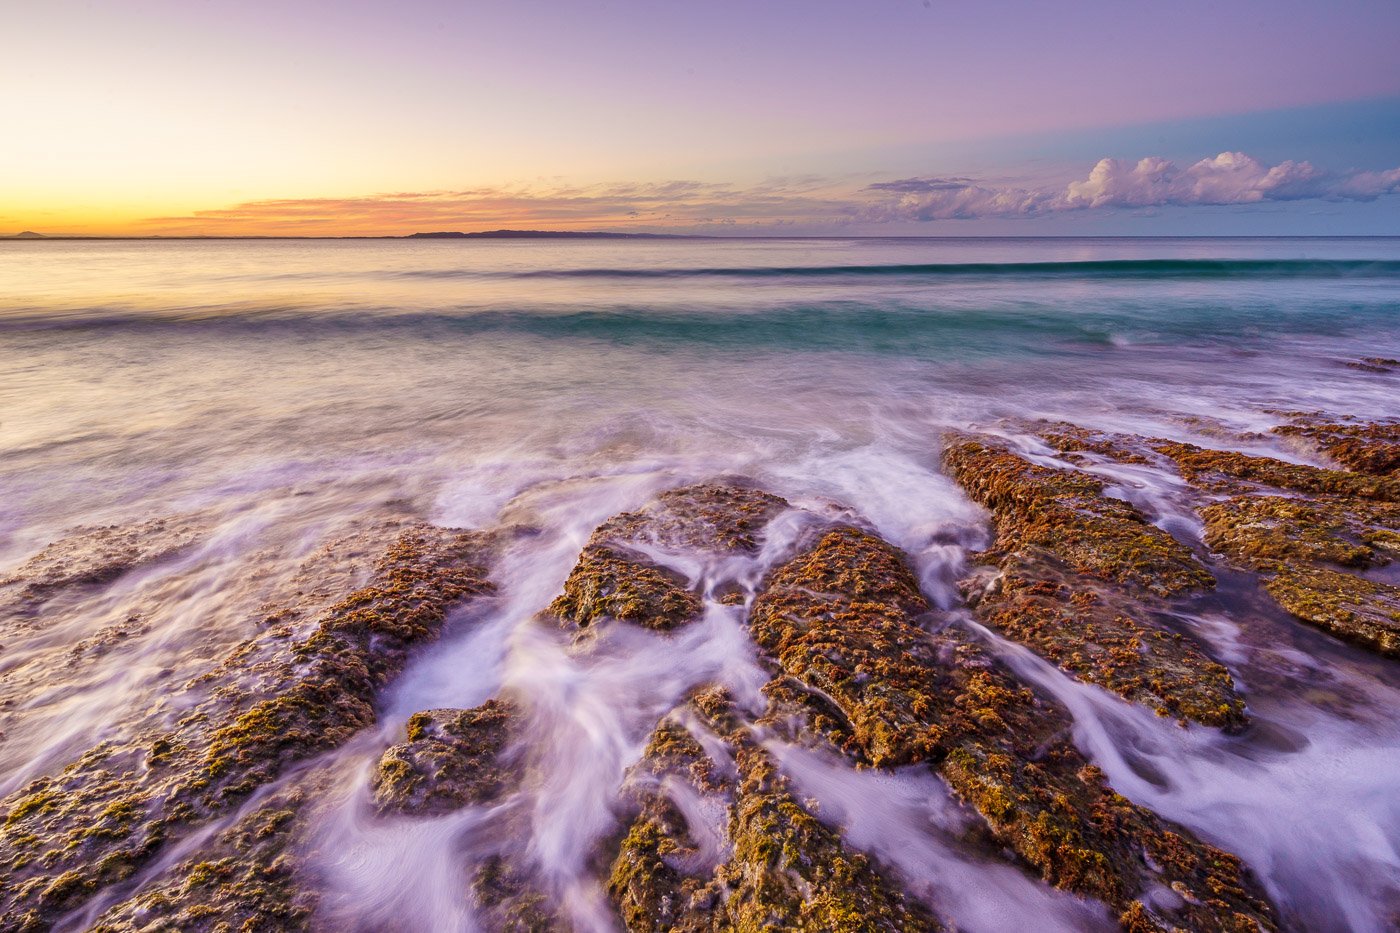 A seascape image edited using graduated filters for landscape photography in Adobe Lightroom